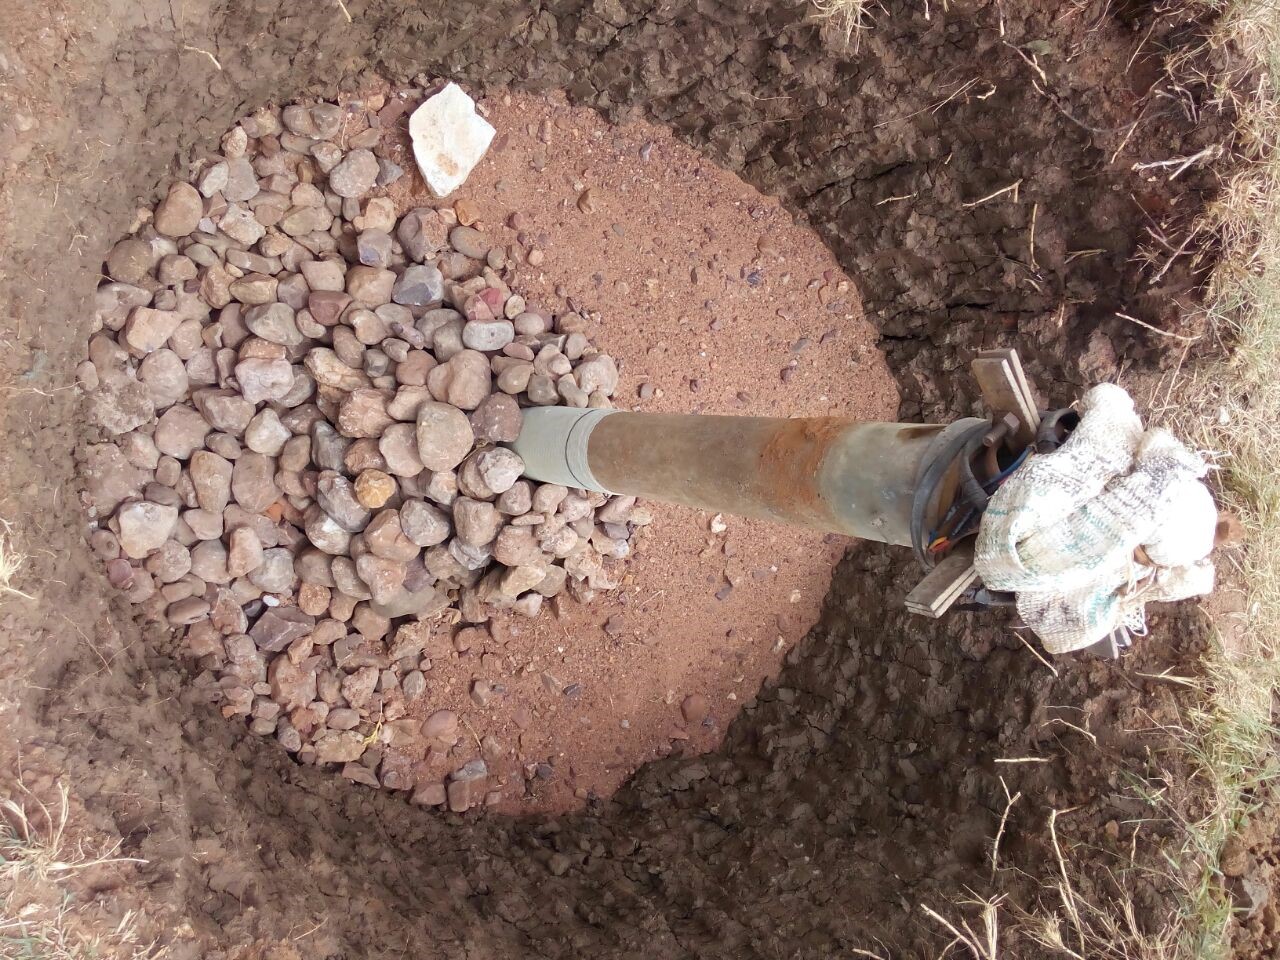 Stones, rocks are filled in recharge pit for proper water filtration.